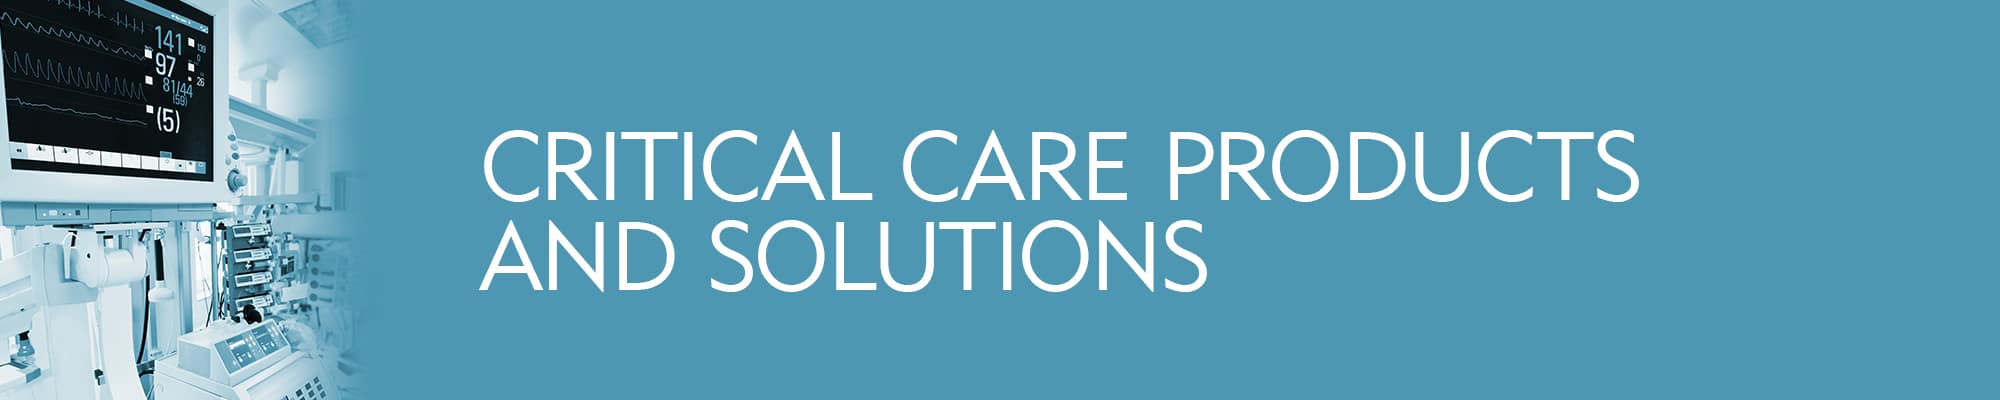 Critical Care Solutions & Products - Merit Medical